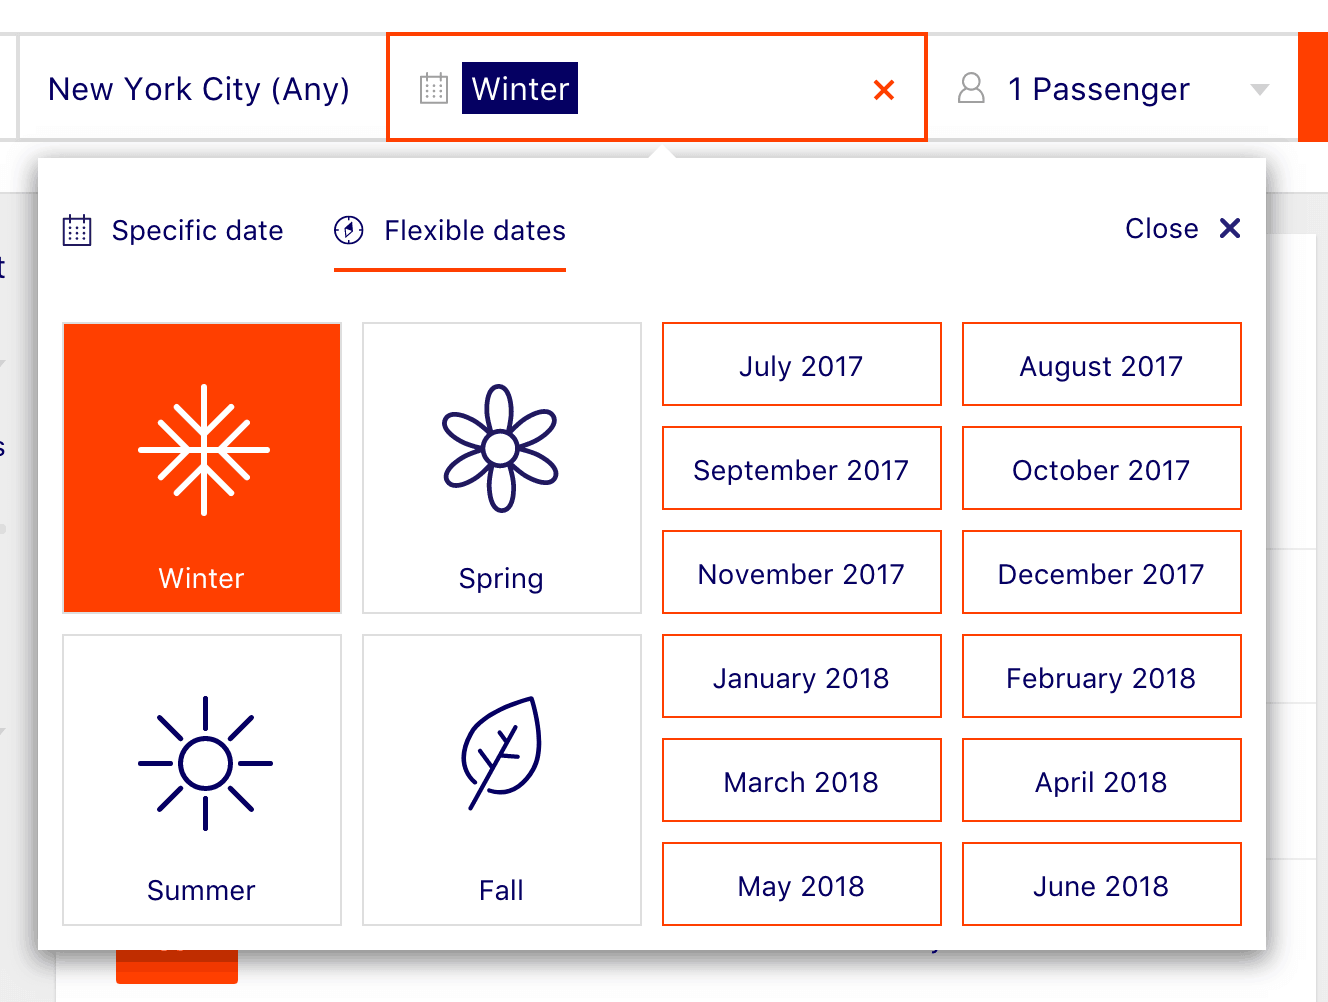 UI Design Choice for a travel app showcasing the proper use of icons and elements